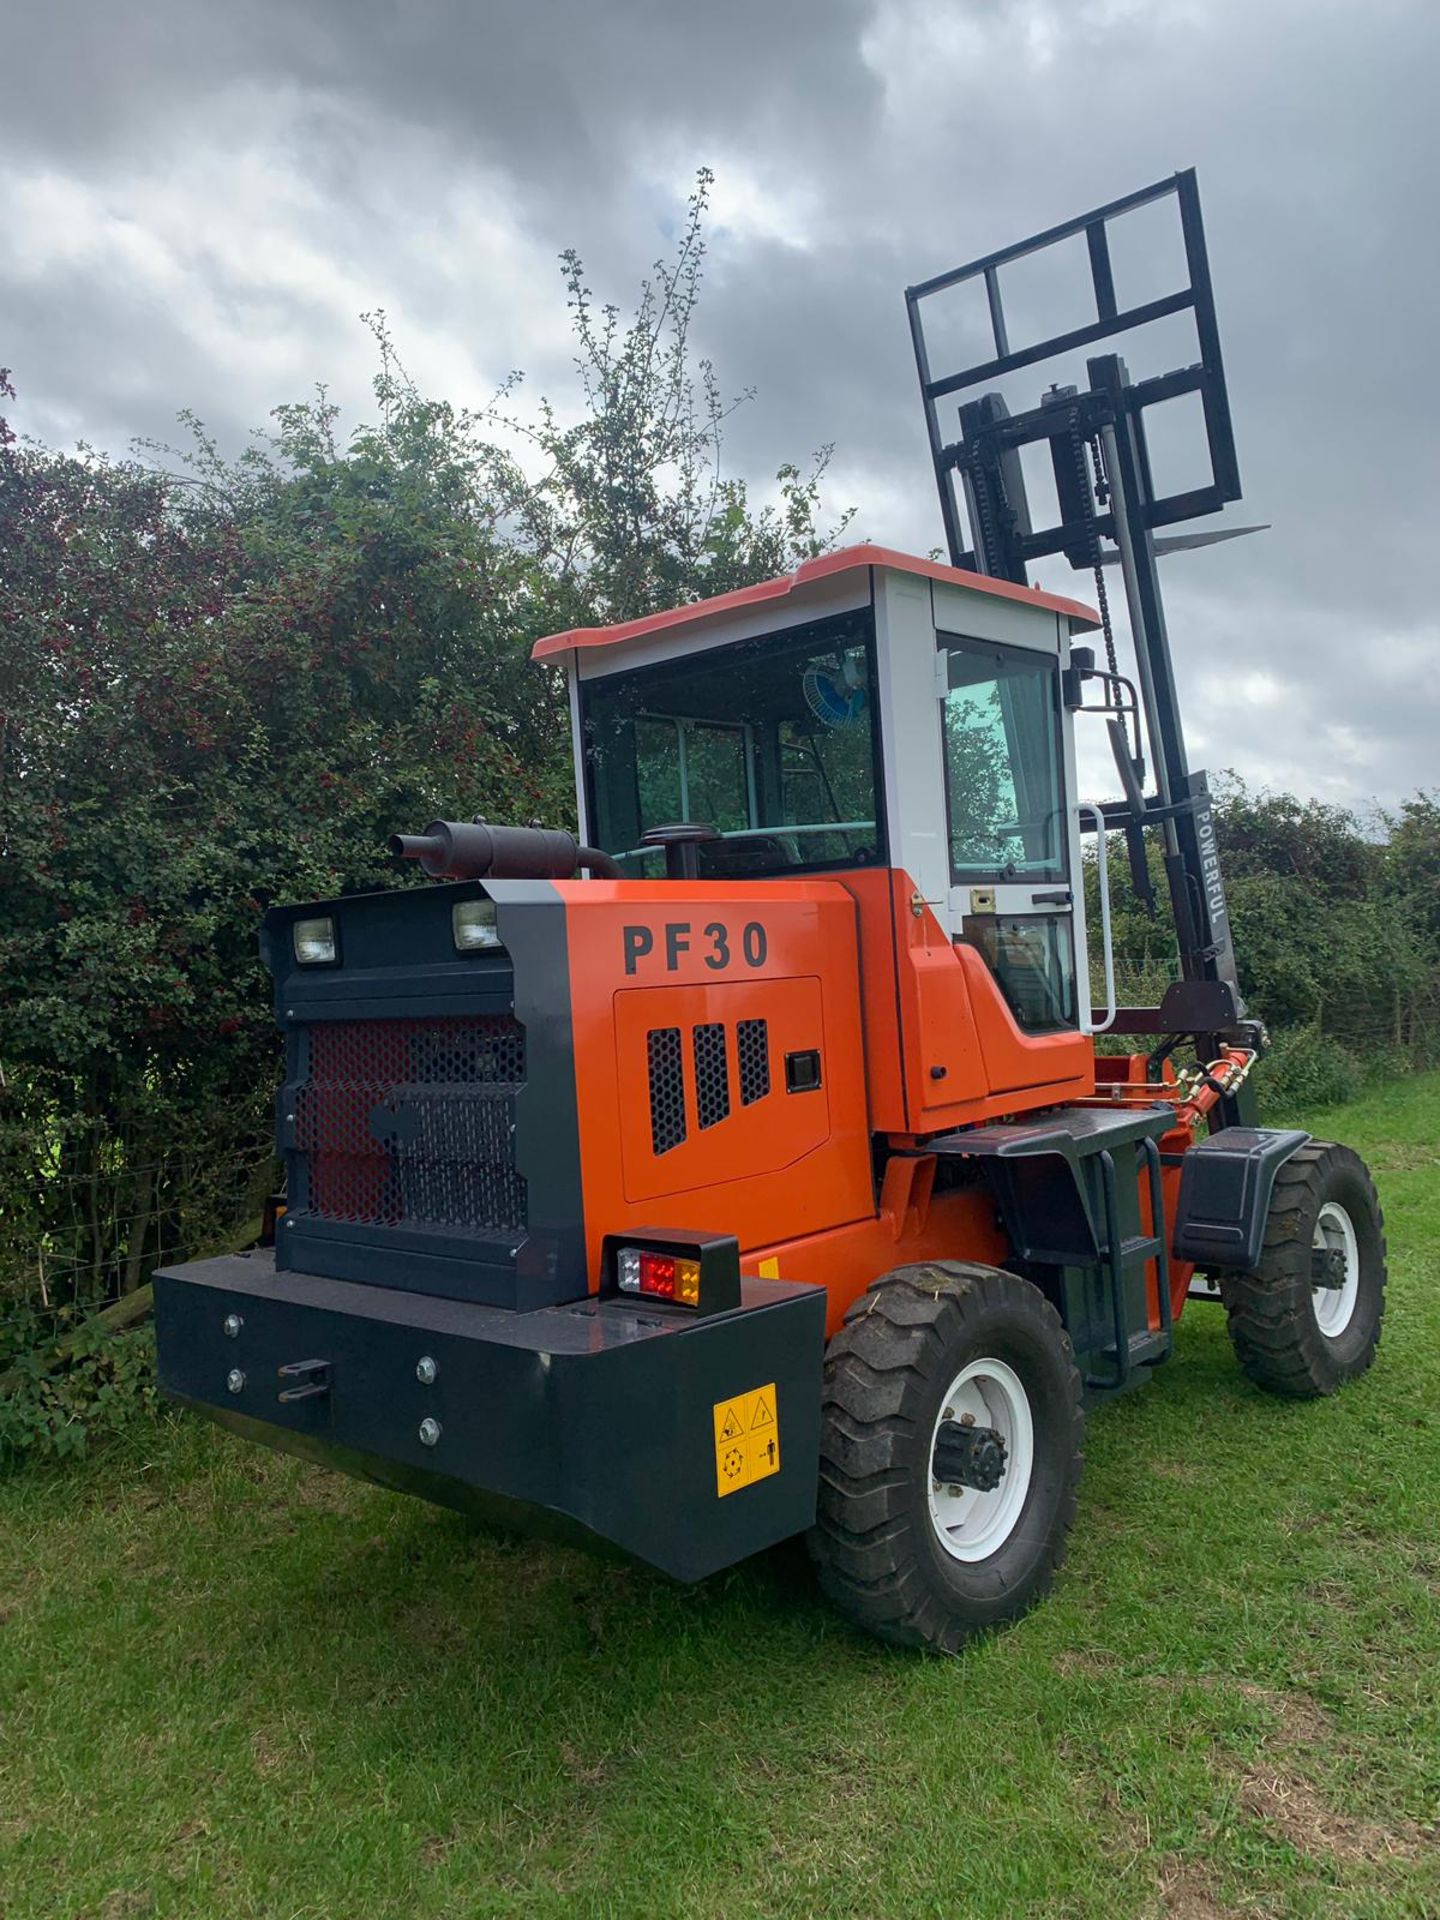 BRAND NEW 2019 POWERFUL PF30 4X4 ROUGH TERRAIN POWERFUL FORKLIFT C/W 2 STAGE MAST *PLUS VAT* - Image 4 of 12